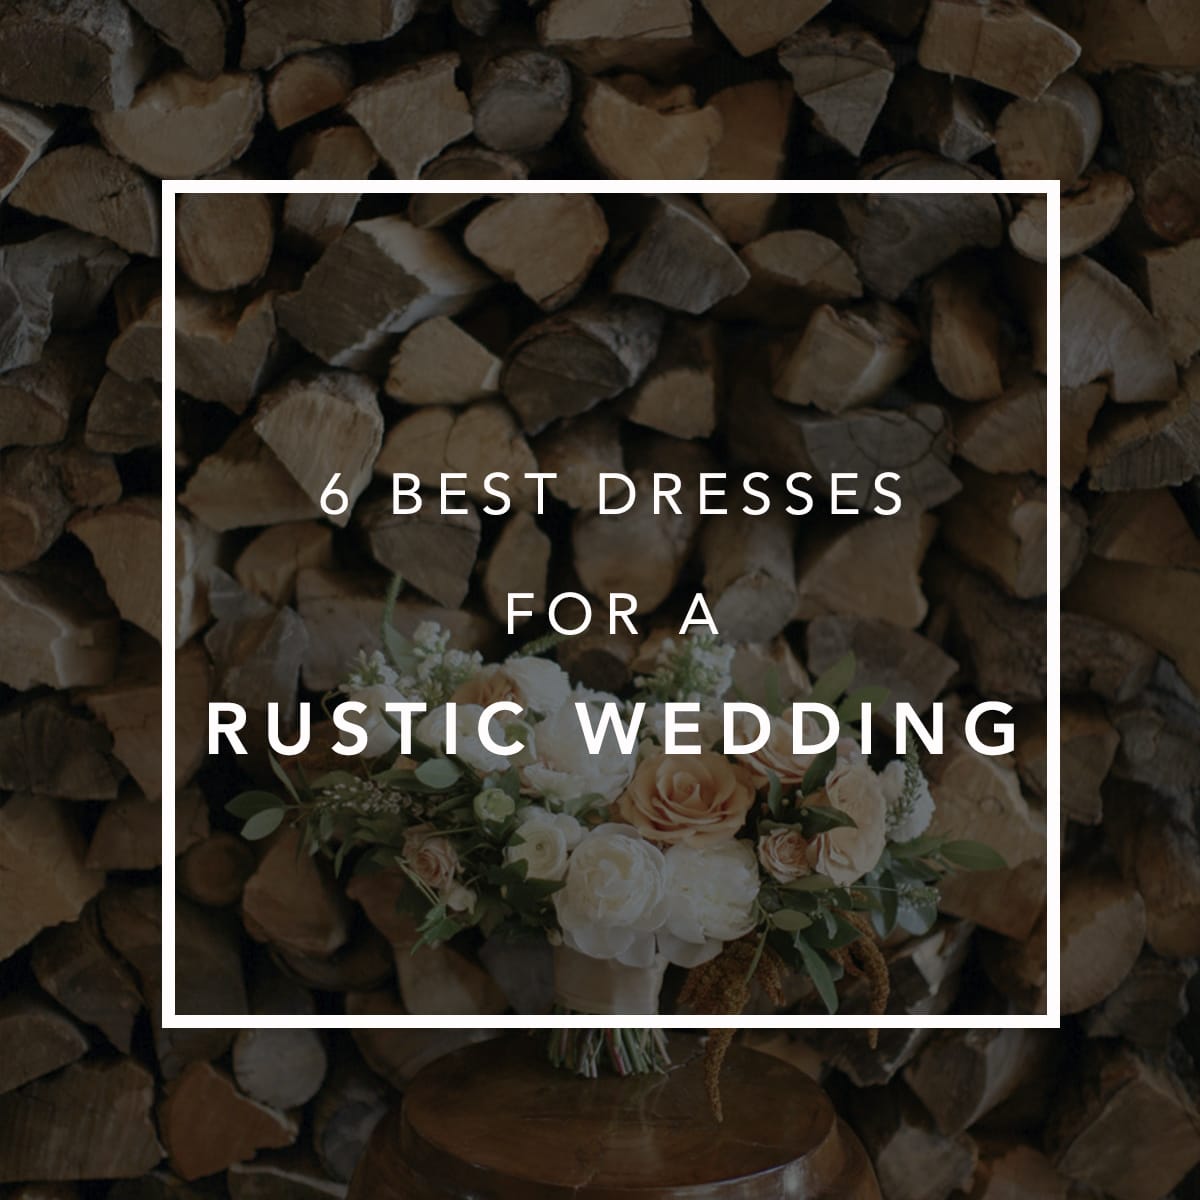 6 Best Dresses for a Rustic Wedding Image